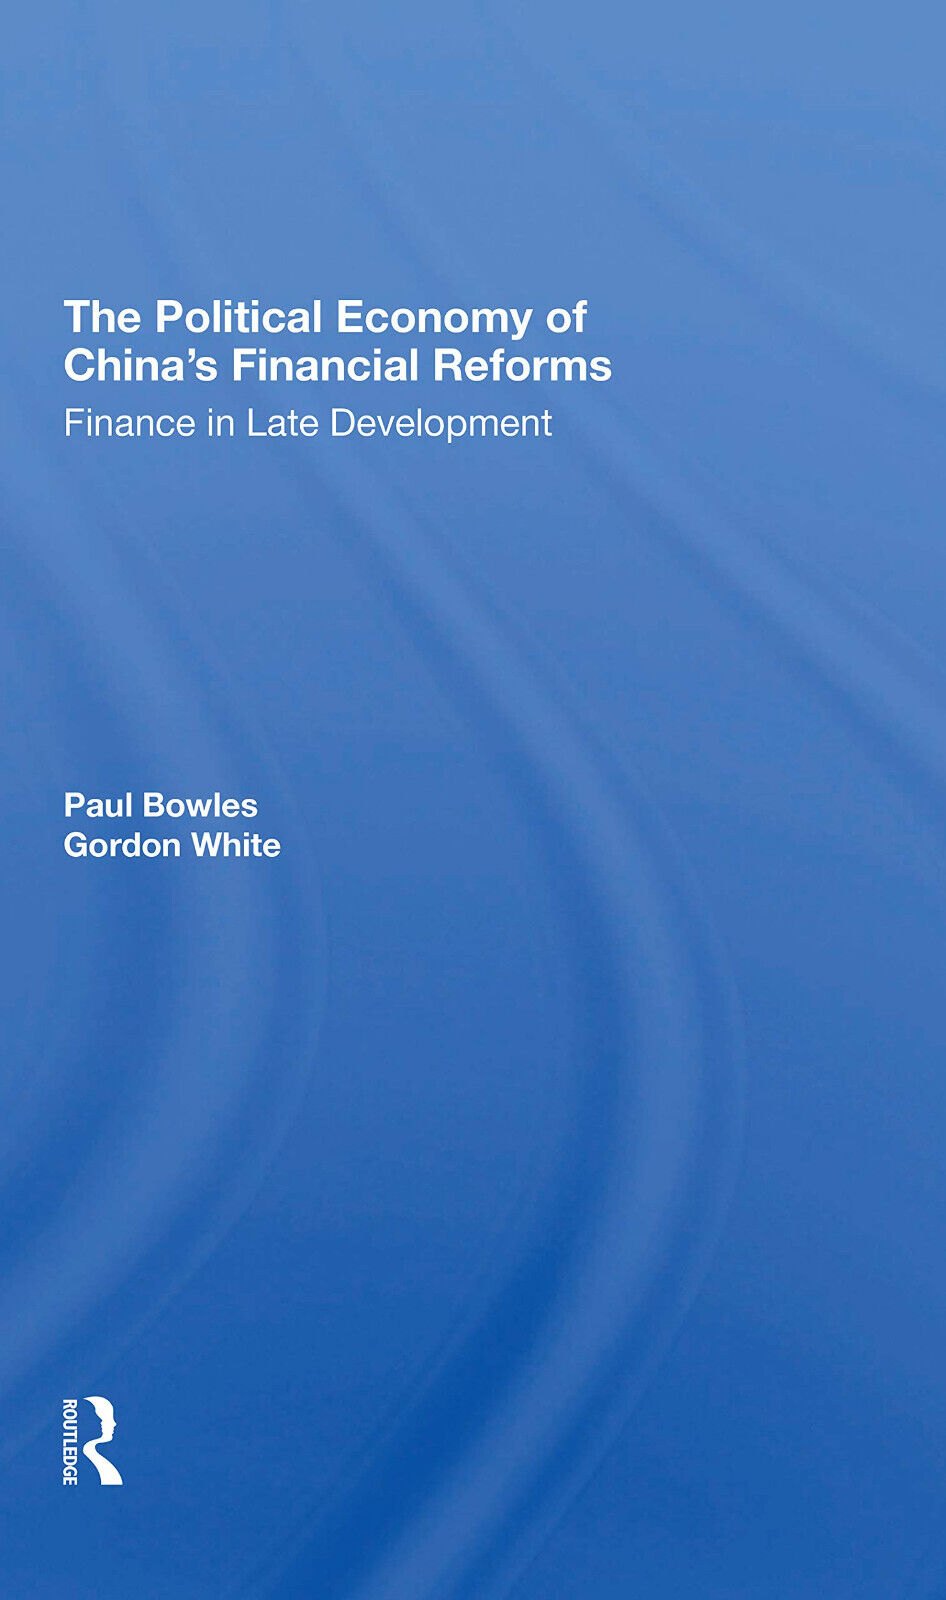 The Political Economy Of China's Financial Reforms - Routledge, 2021